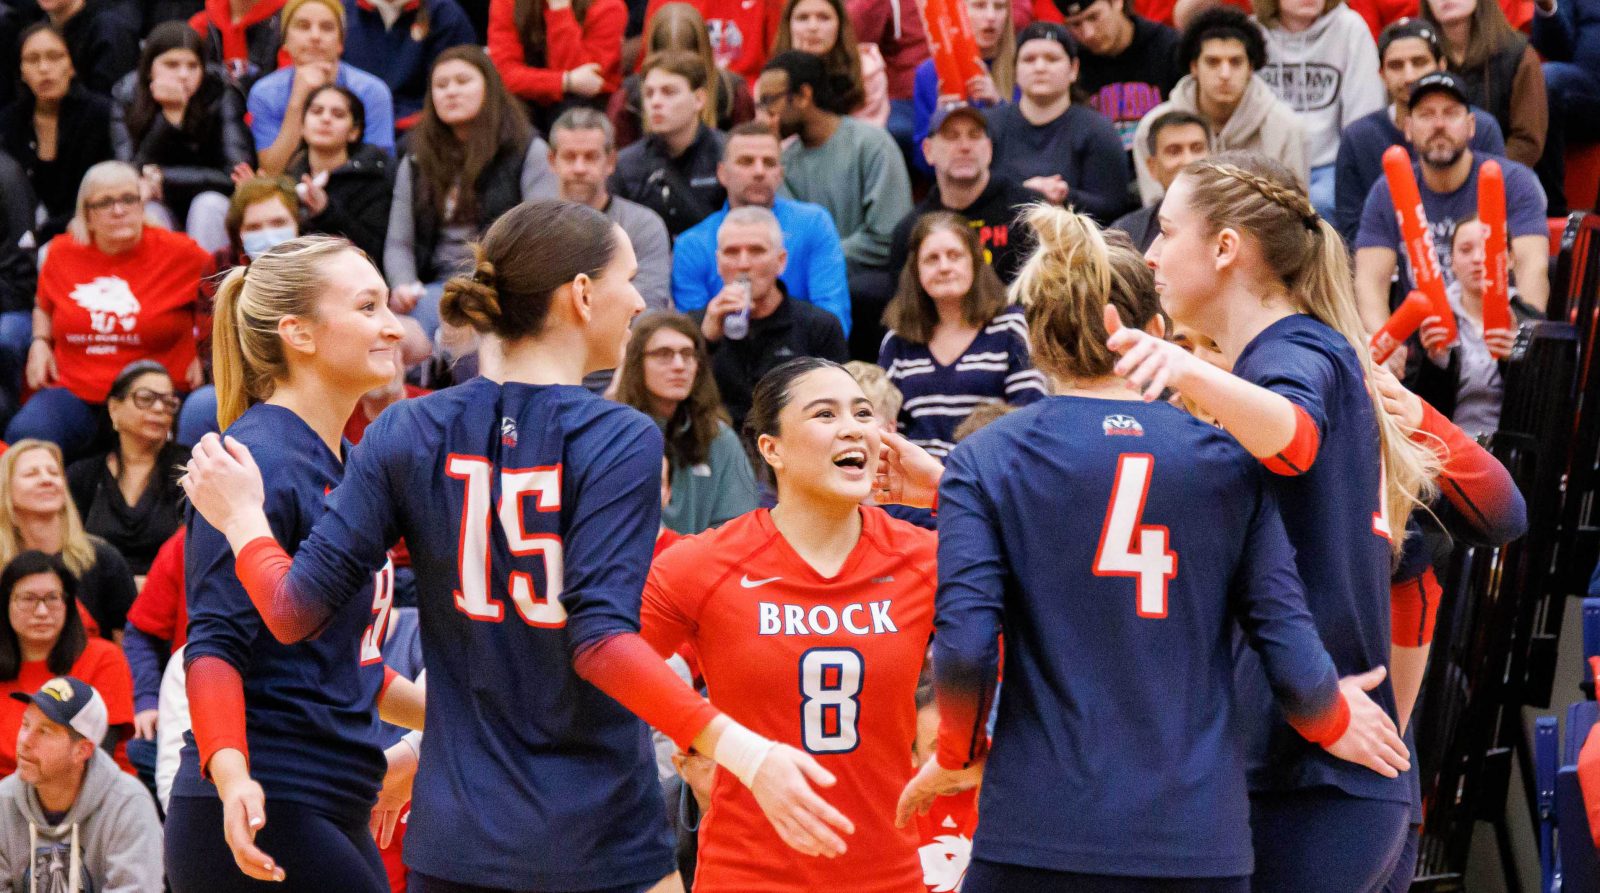 A team of women’s volleyball players celebrate a point in front of a crowd.